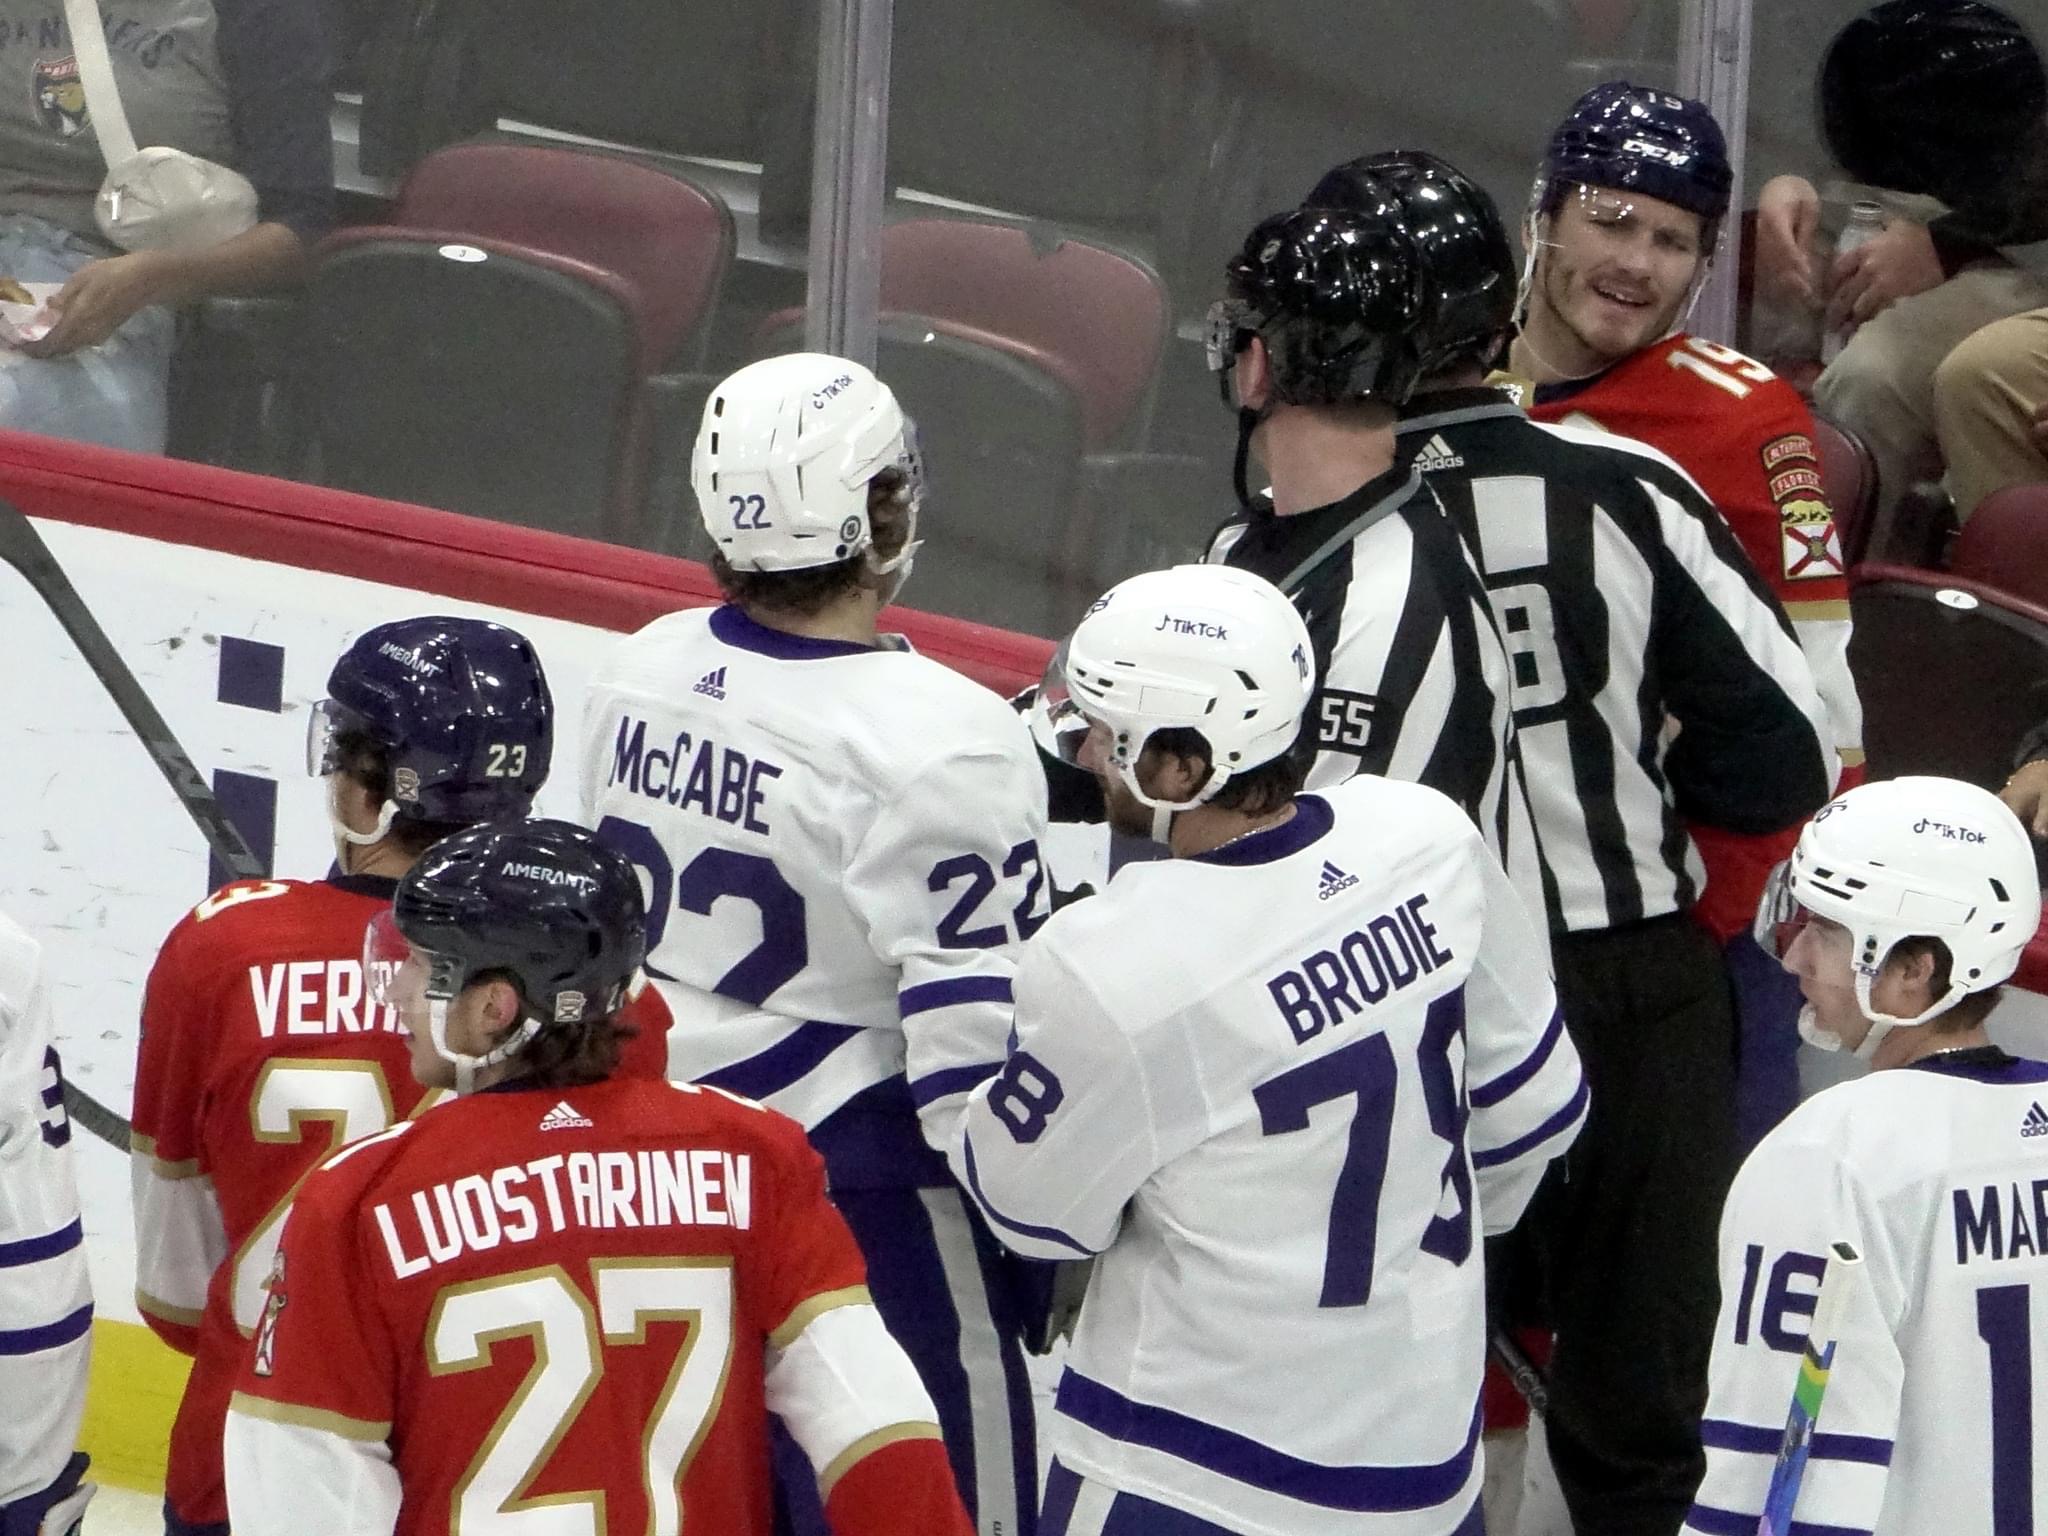 Maple Leafs eliminated from playoffs as Panthers' Cousins scores